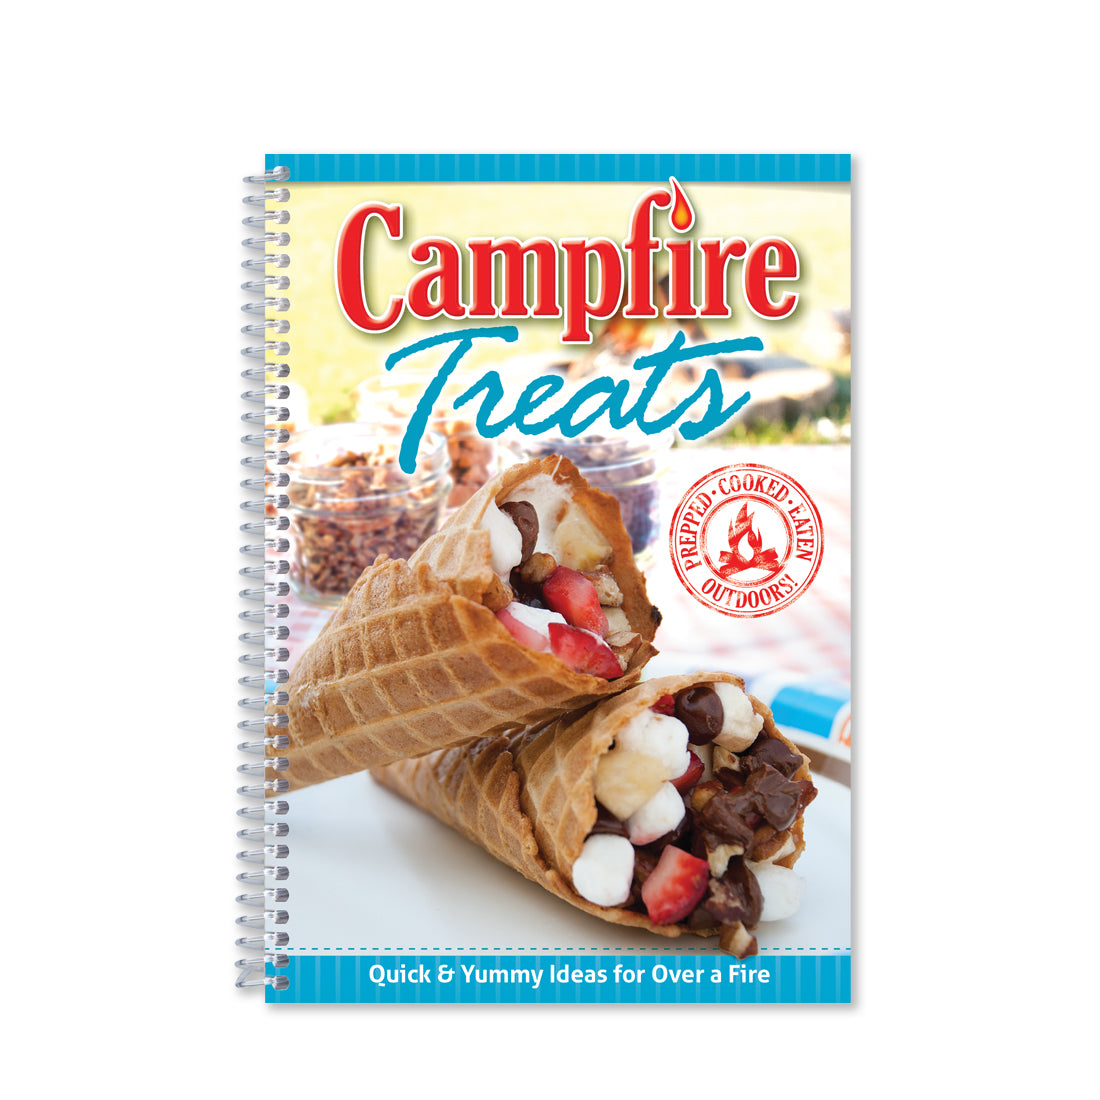 campfire foods, including snacks, desserts, and filling meals. Everything in the book is tasty, quick, and easy, meaning that these campfire treats are as fun to make as they are satisfying to eat!